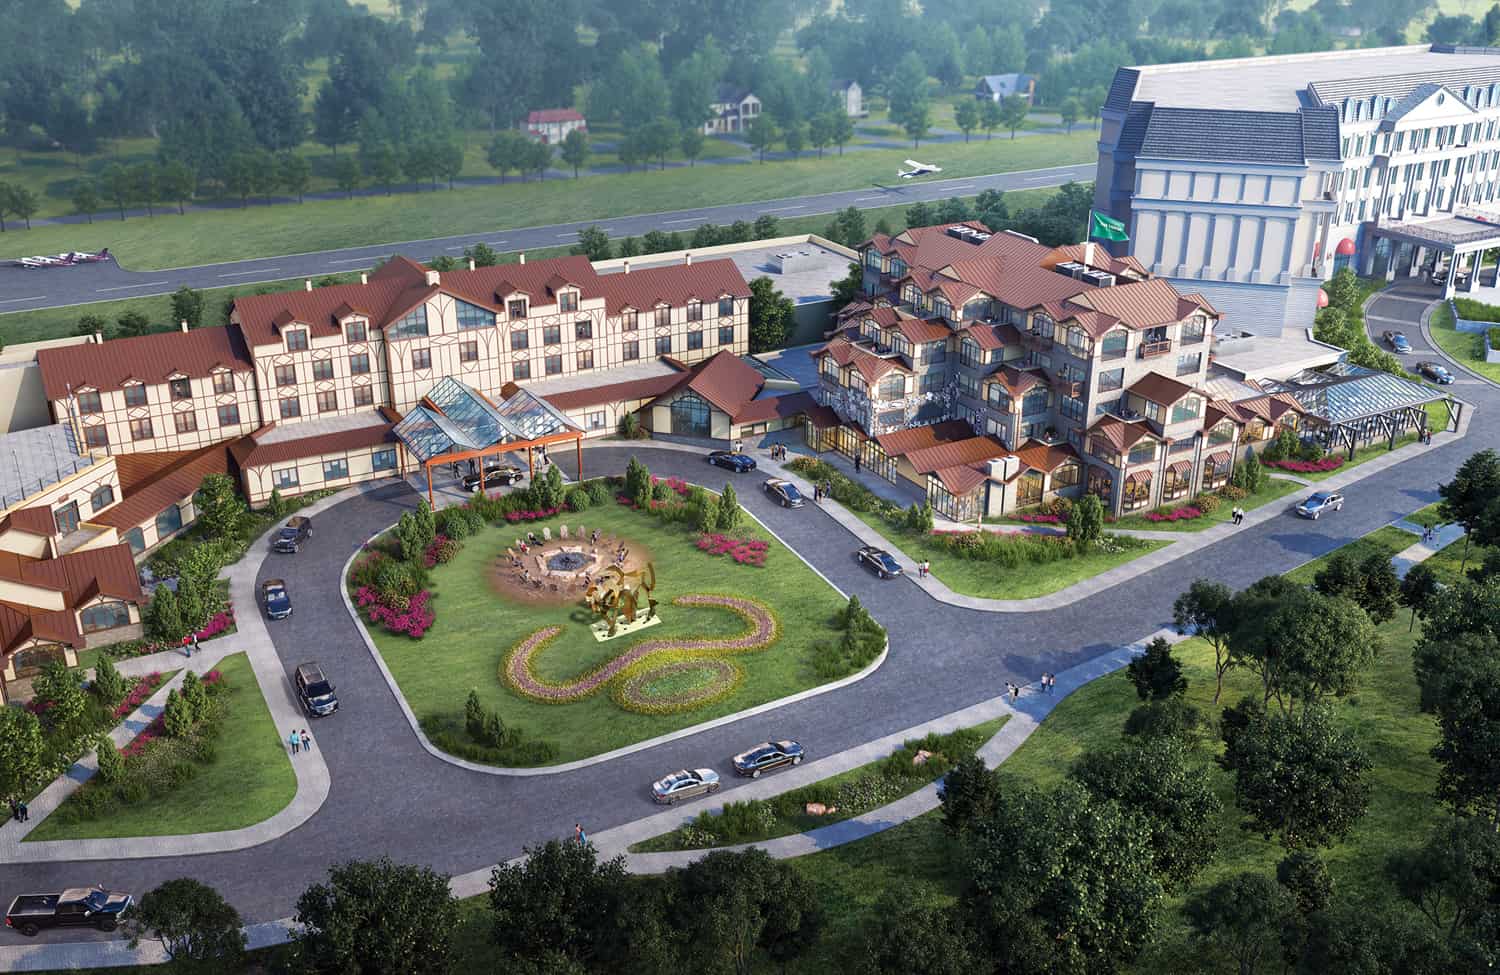 Exciting Changes Ahead at Nemacolin